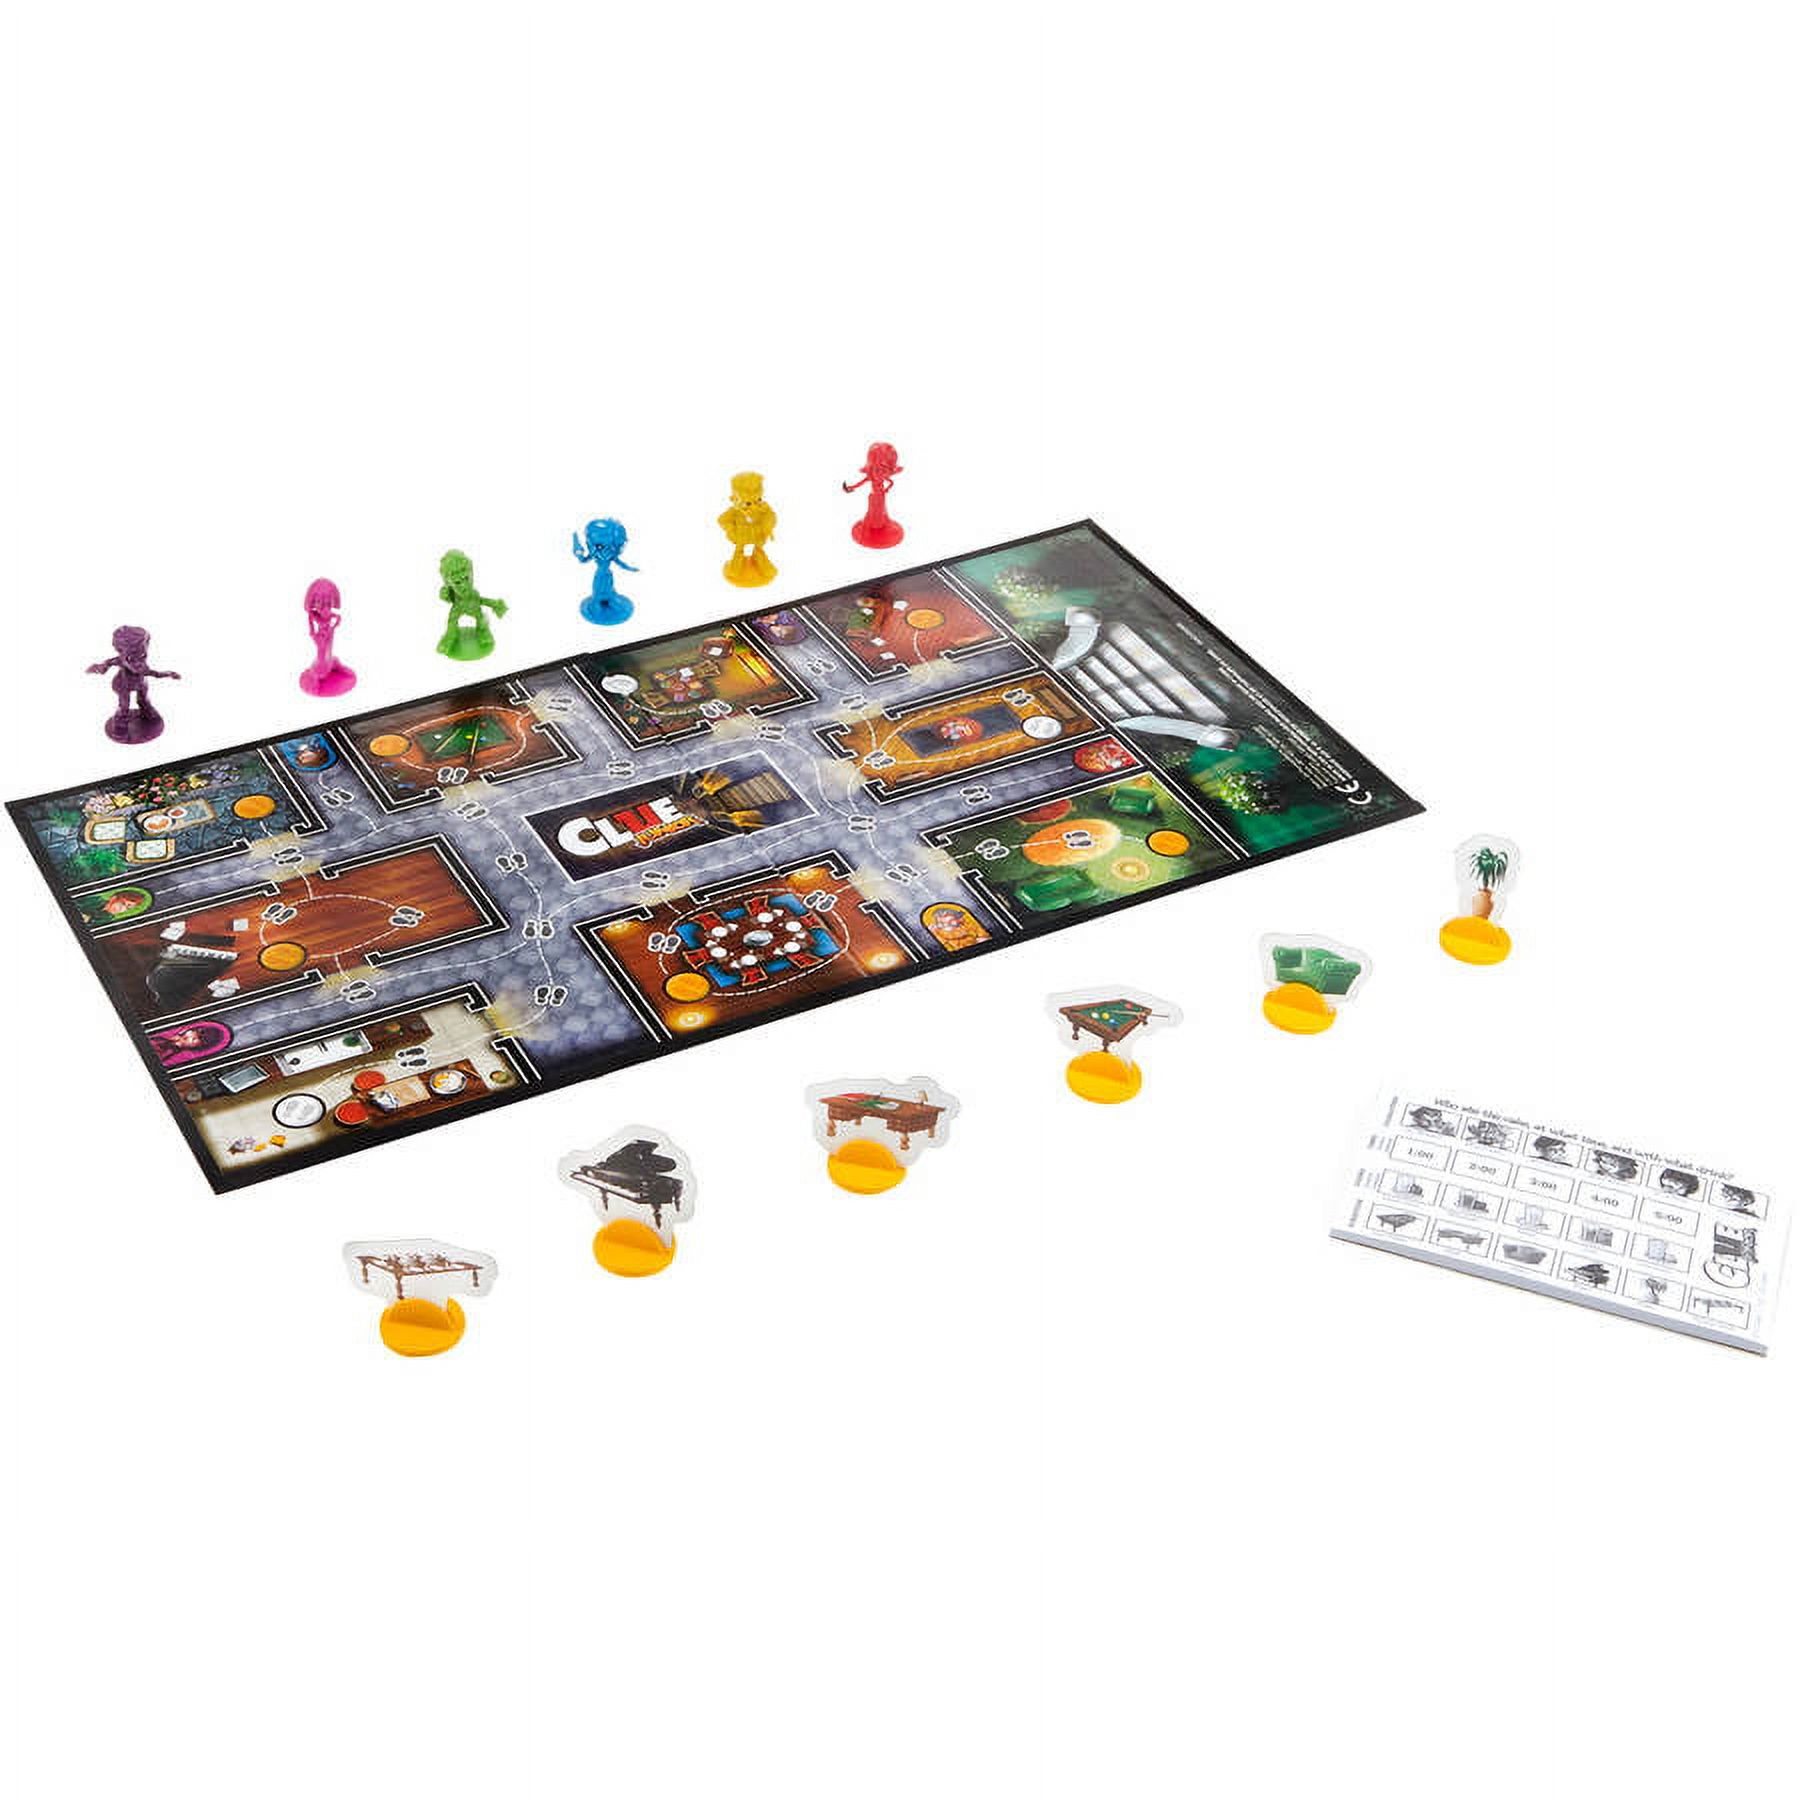 Clue Jr. Board Game; Clue Game for Younger Kids; Mystery Game for Kids; Kids Board Games; Junior Games - image 2 of 11